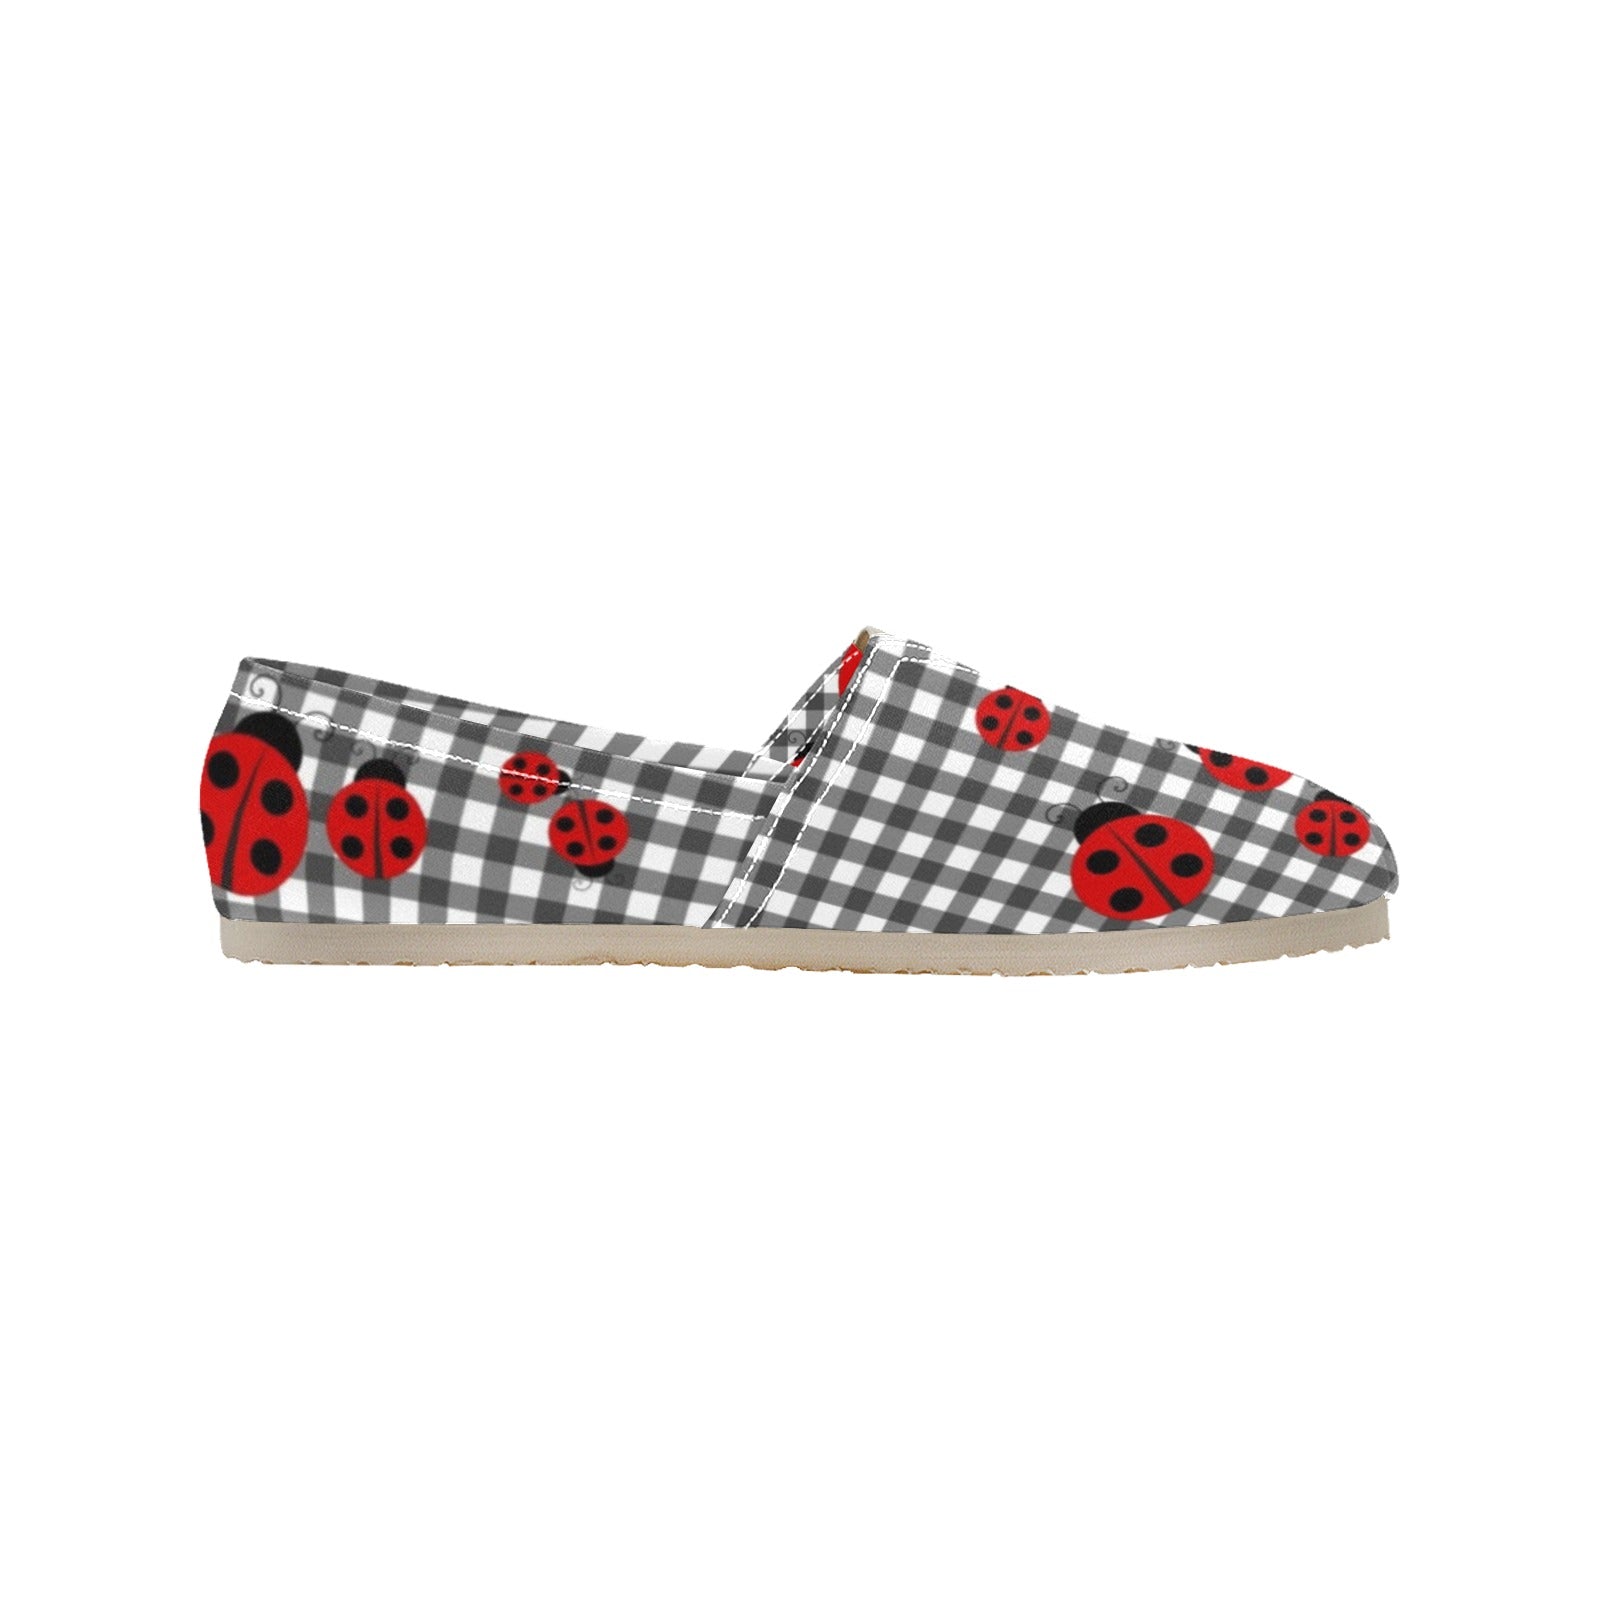 Ladybird Gingham - Casual Canvas Slip-on Shoes